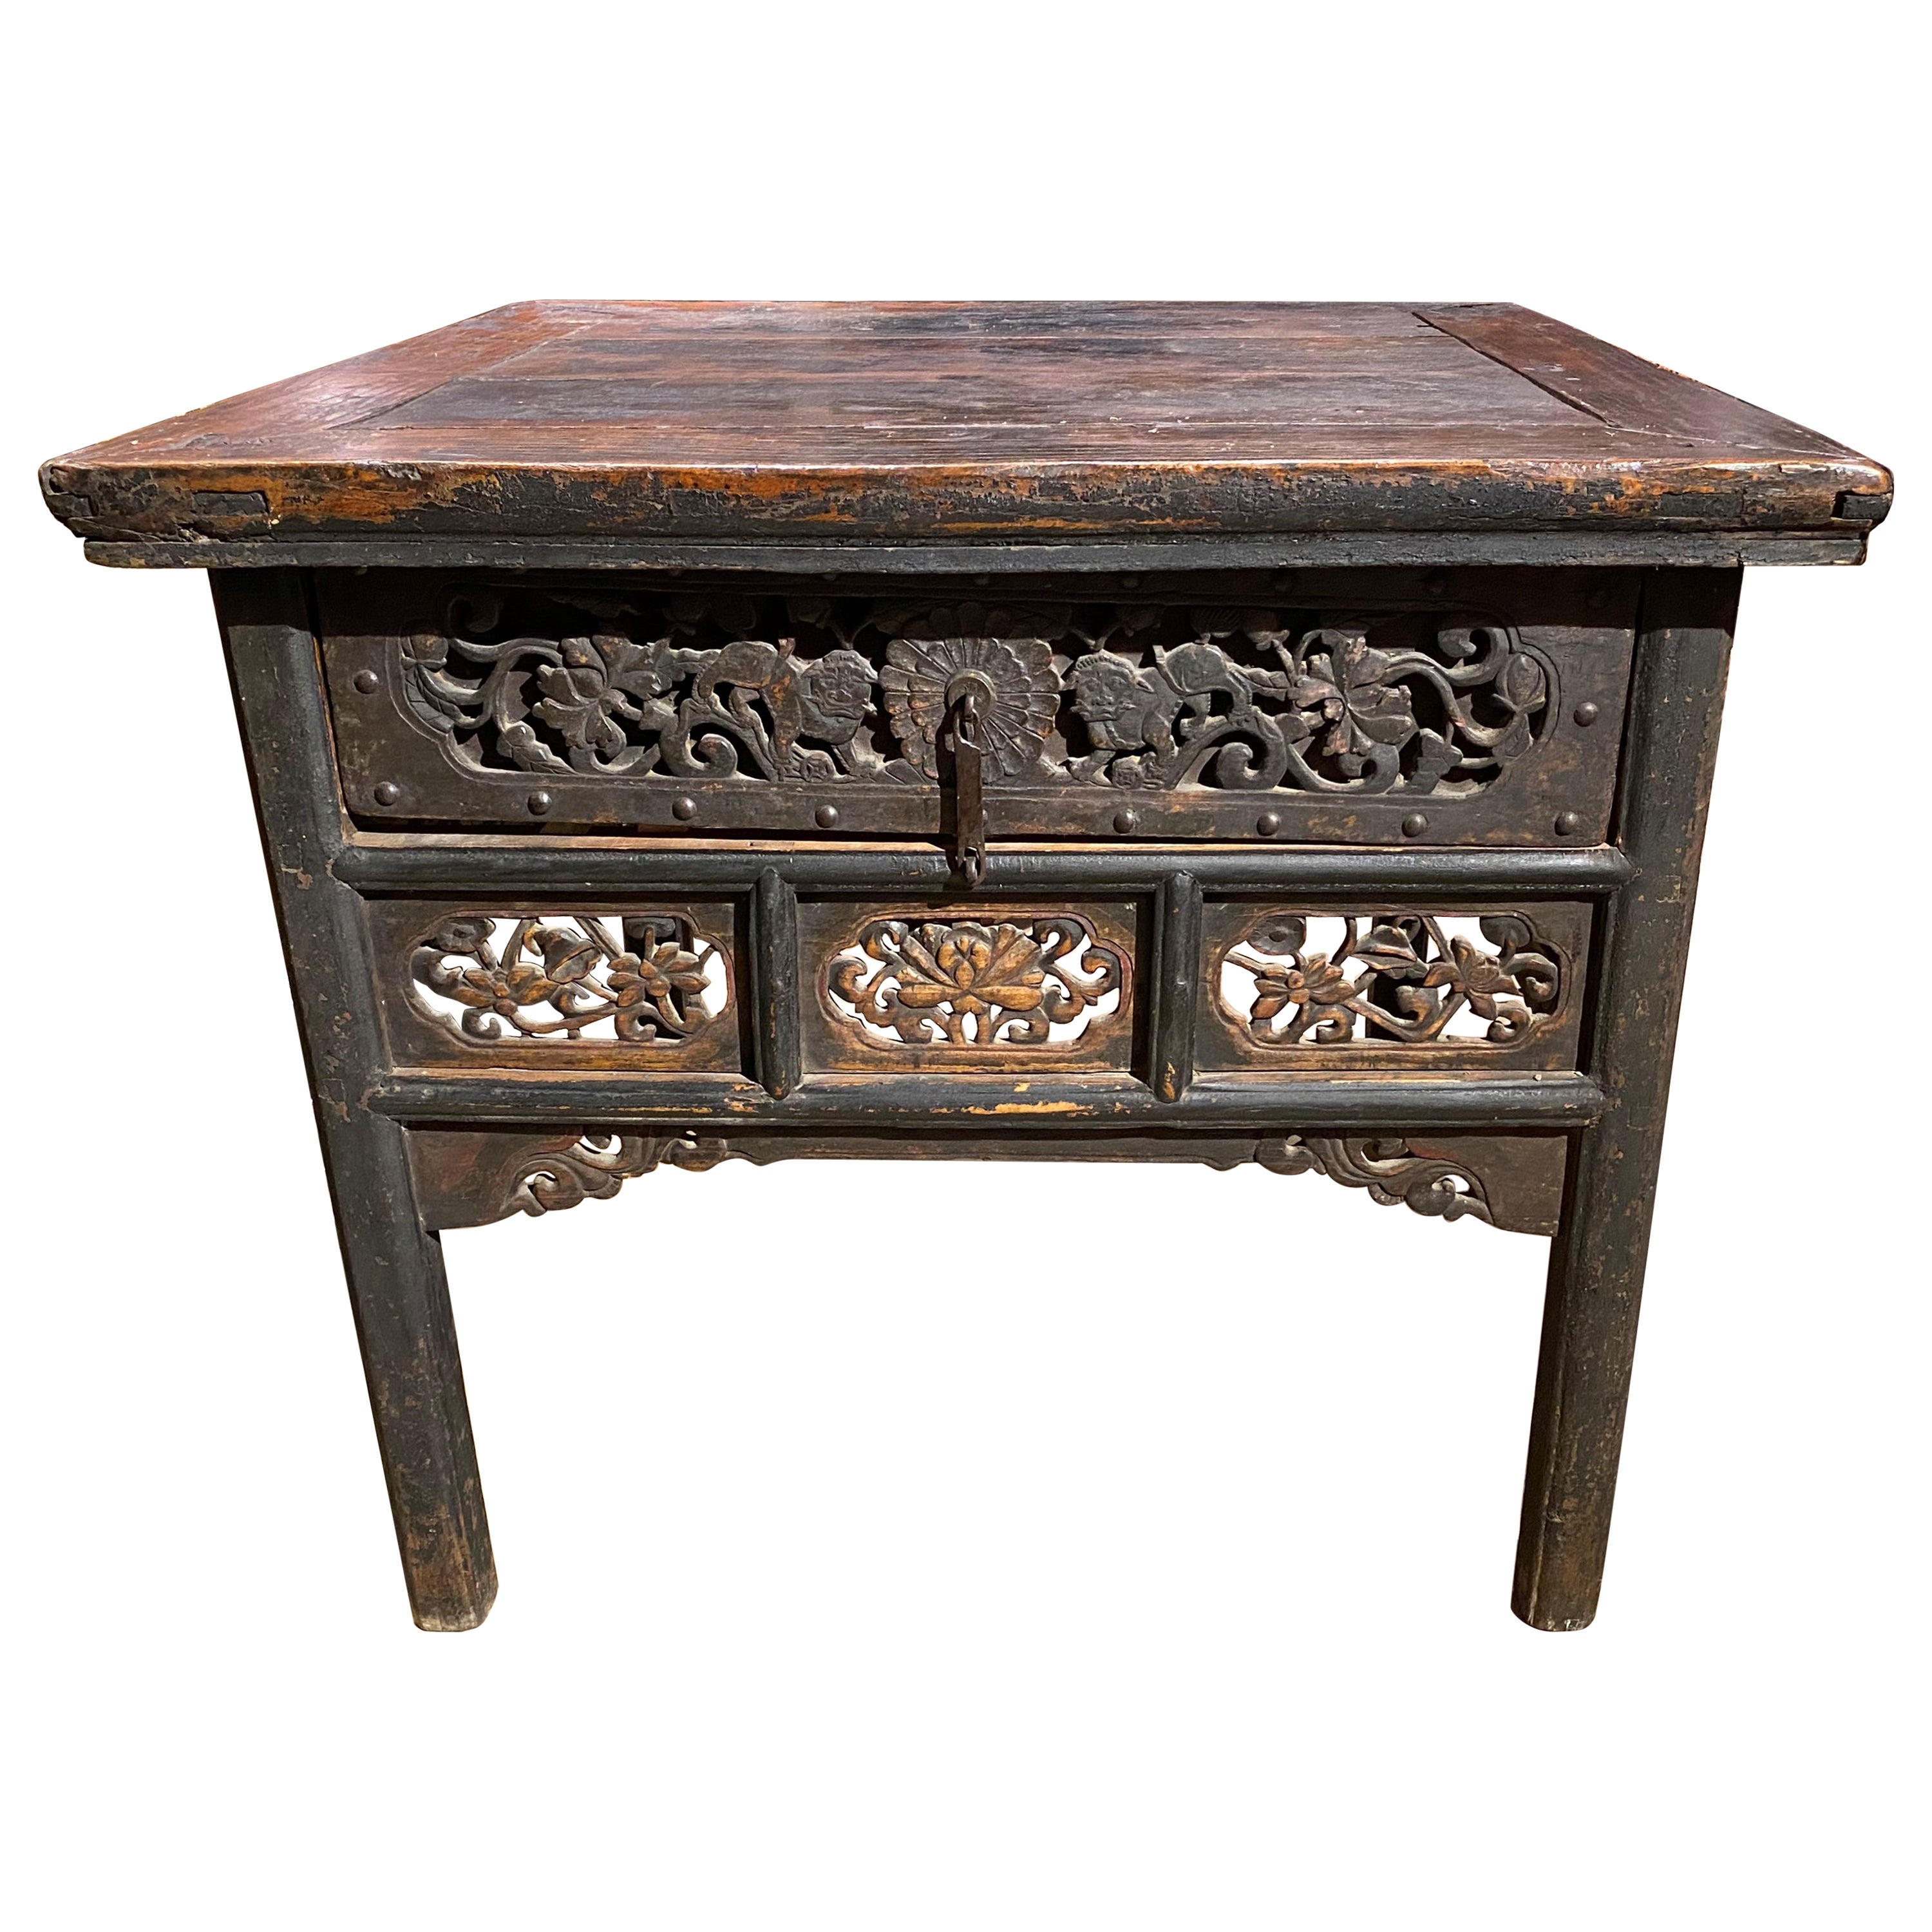 19th Century Chinese Heavily Carved Hardwood Center Table For Sale